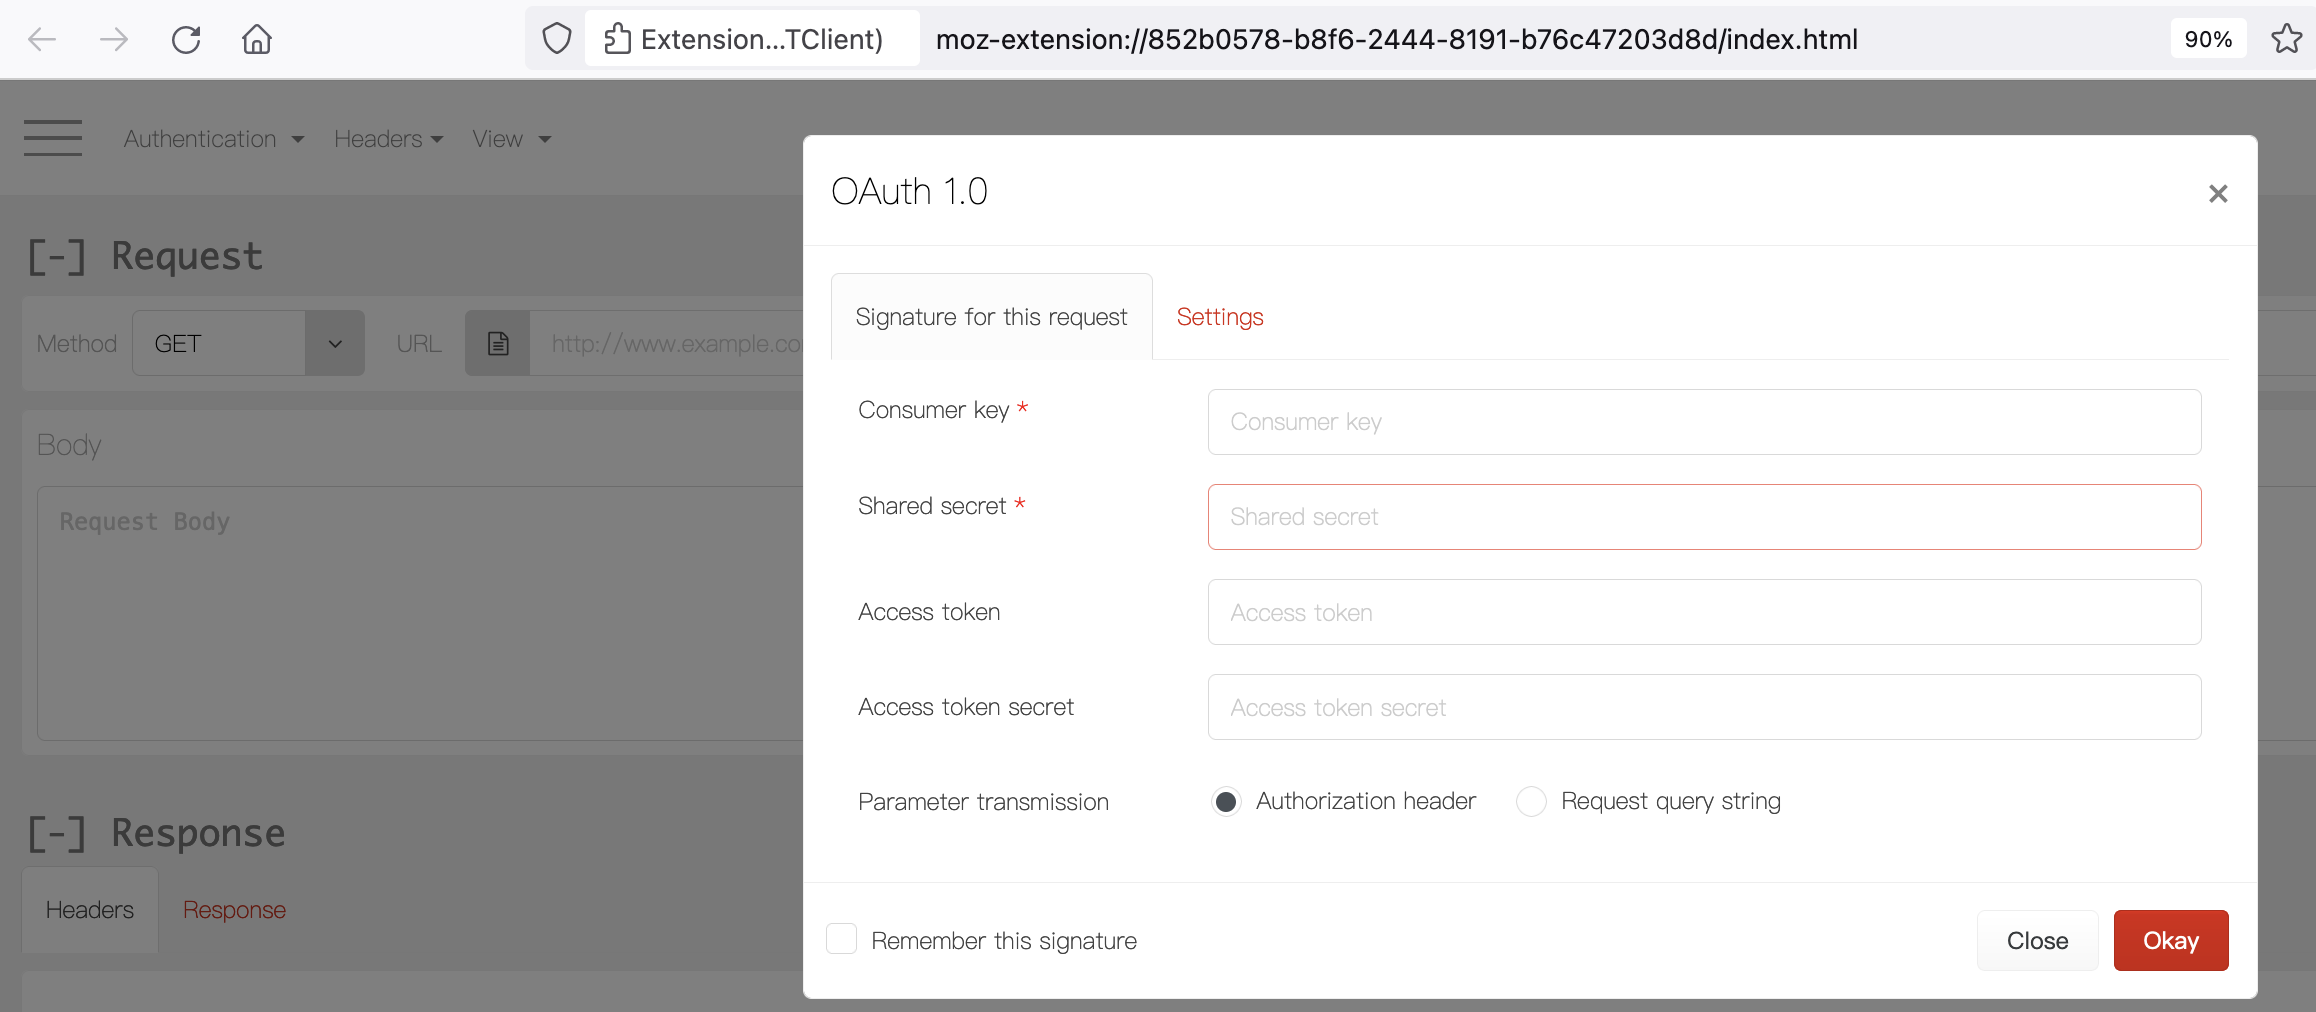 OAuth_1.0_Authentication_UI_in_RESTClient.png